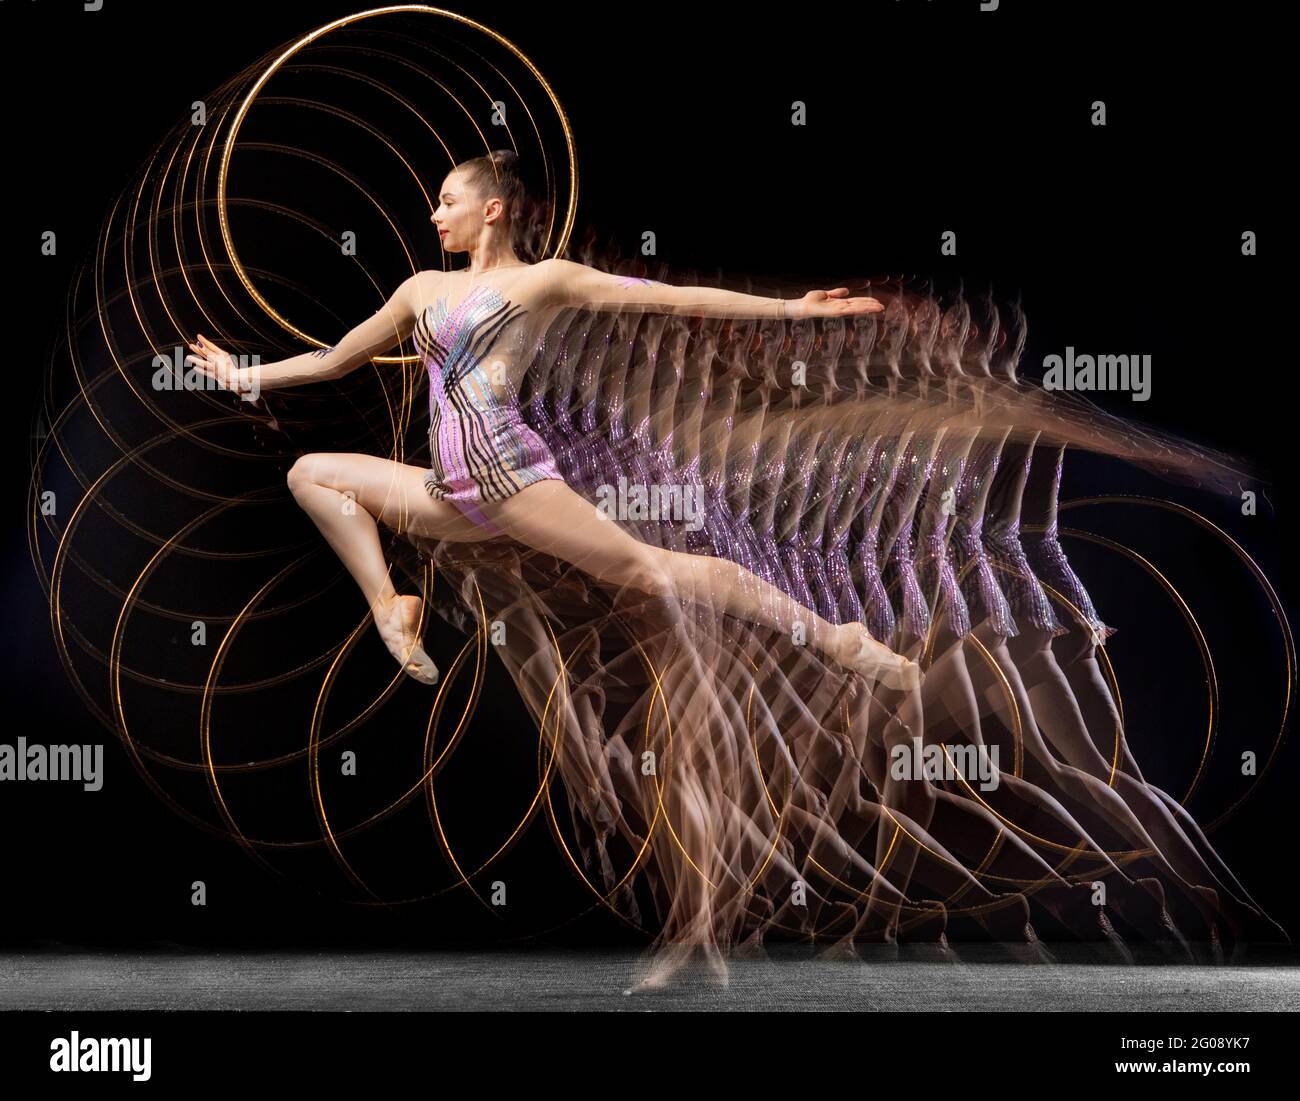 Portrait of young girl rhythmic gymnast in motion and action isolated in mixed light on dark background. Stock Photo